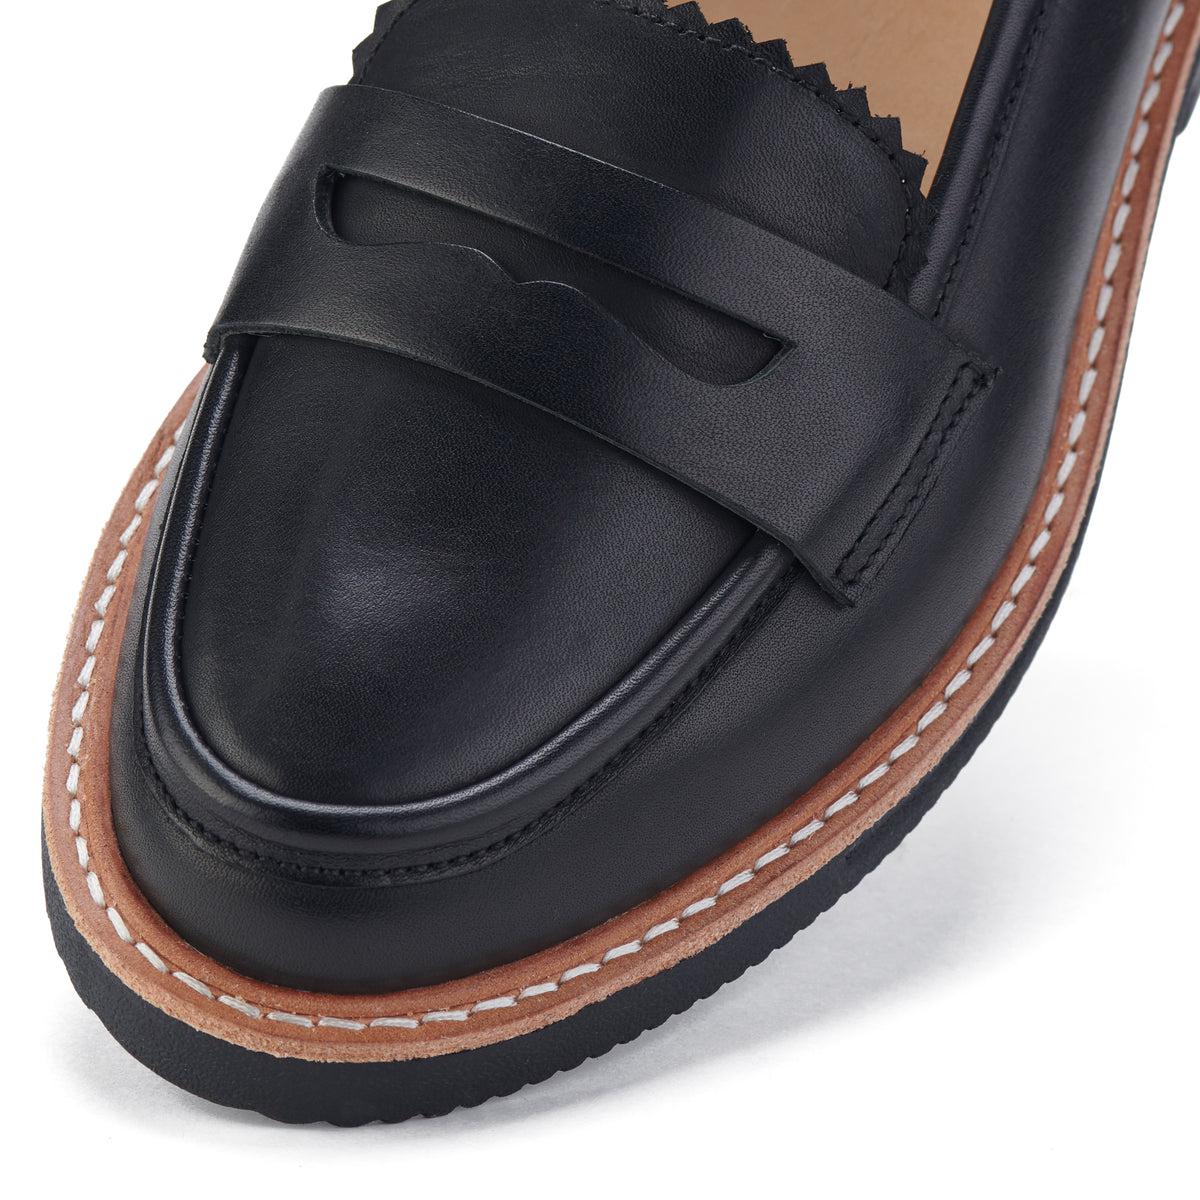 Penny Loafer Rise Black-Footwear-Rollie-The Bay Room